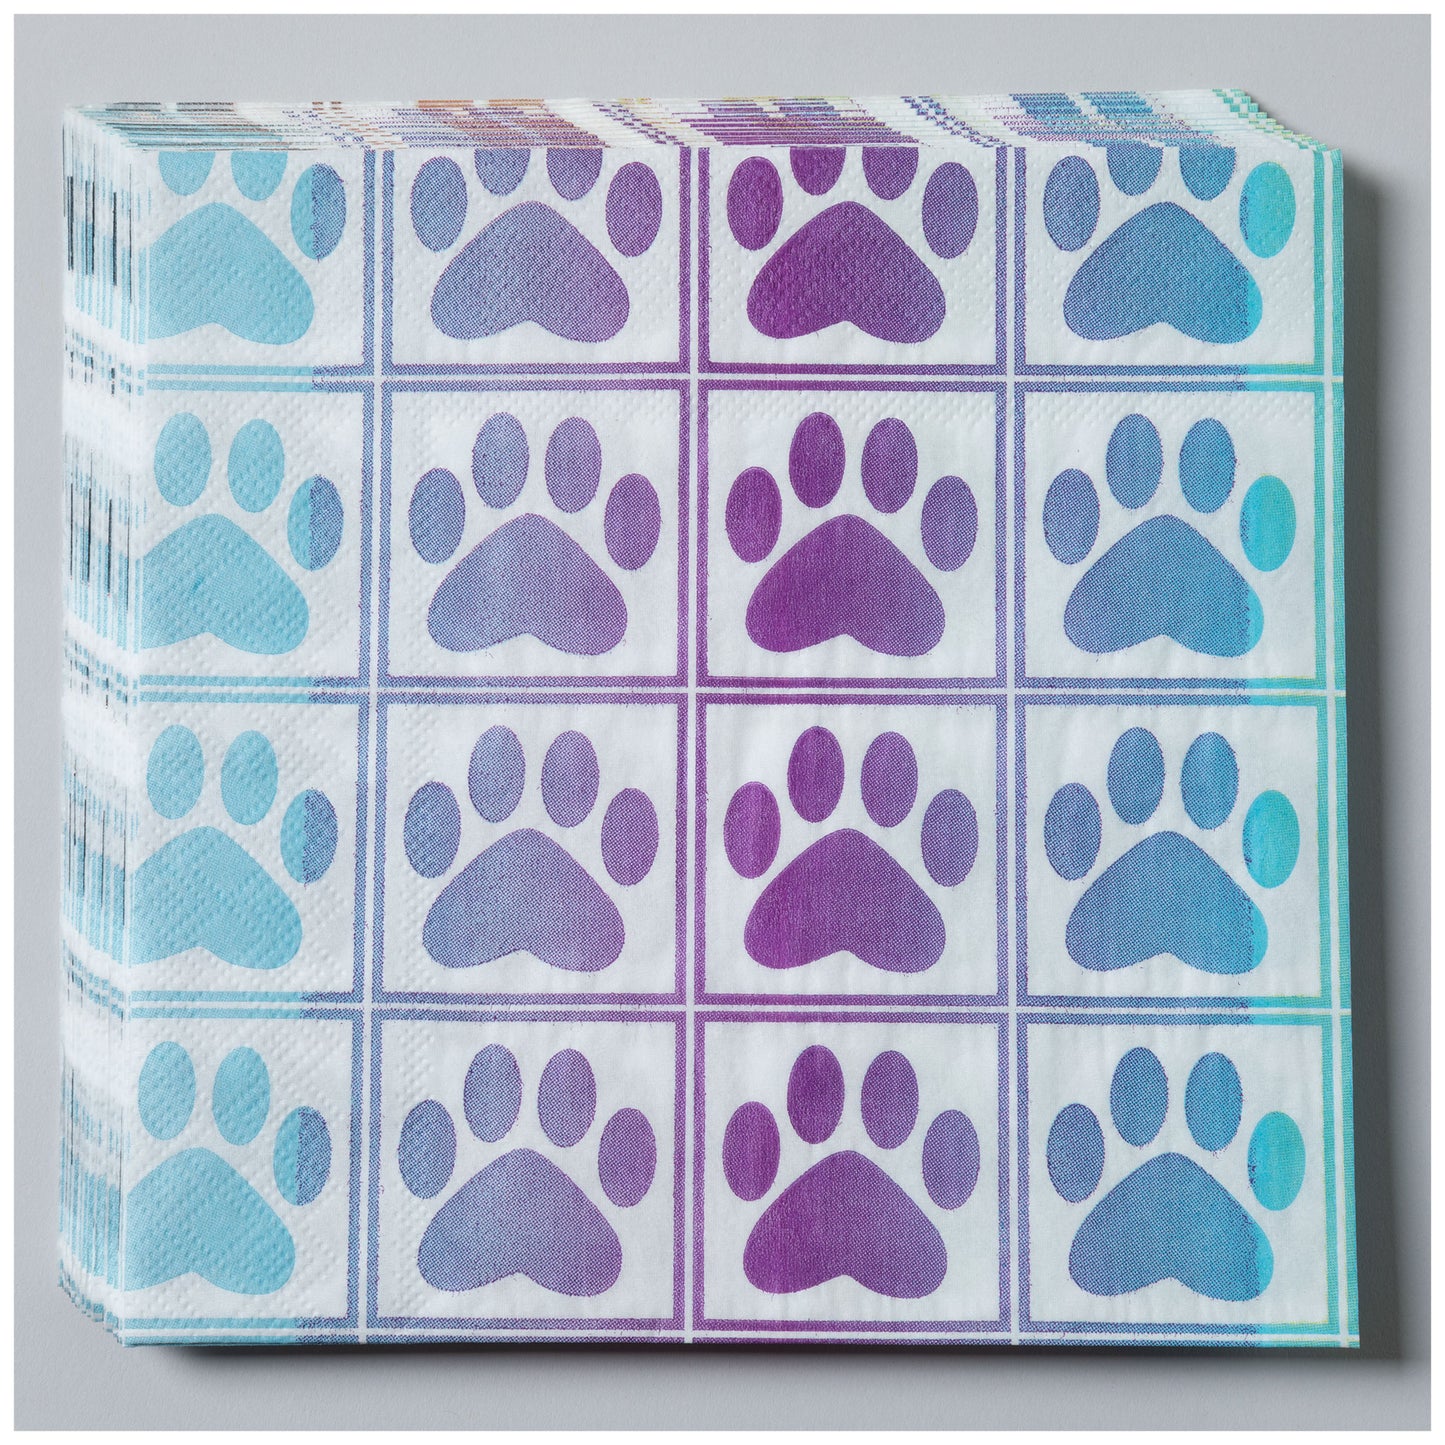 Pawfect Occasion Paper Plates & Napkins